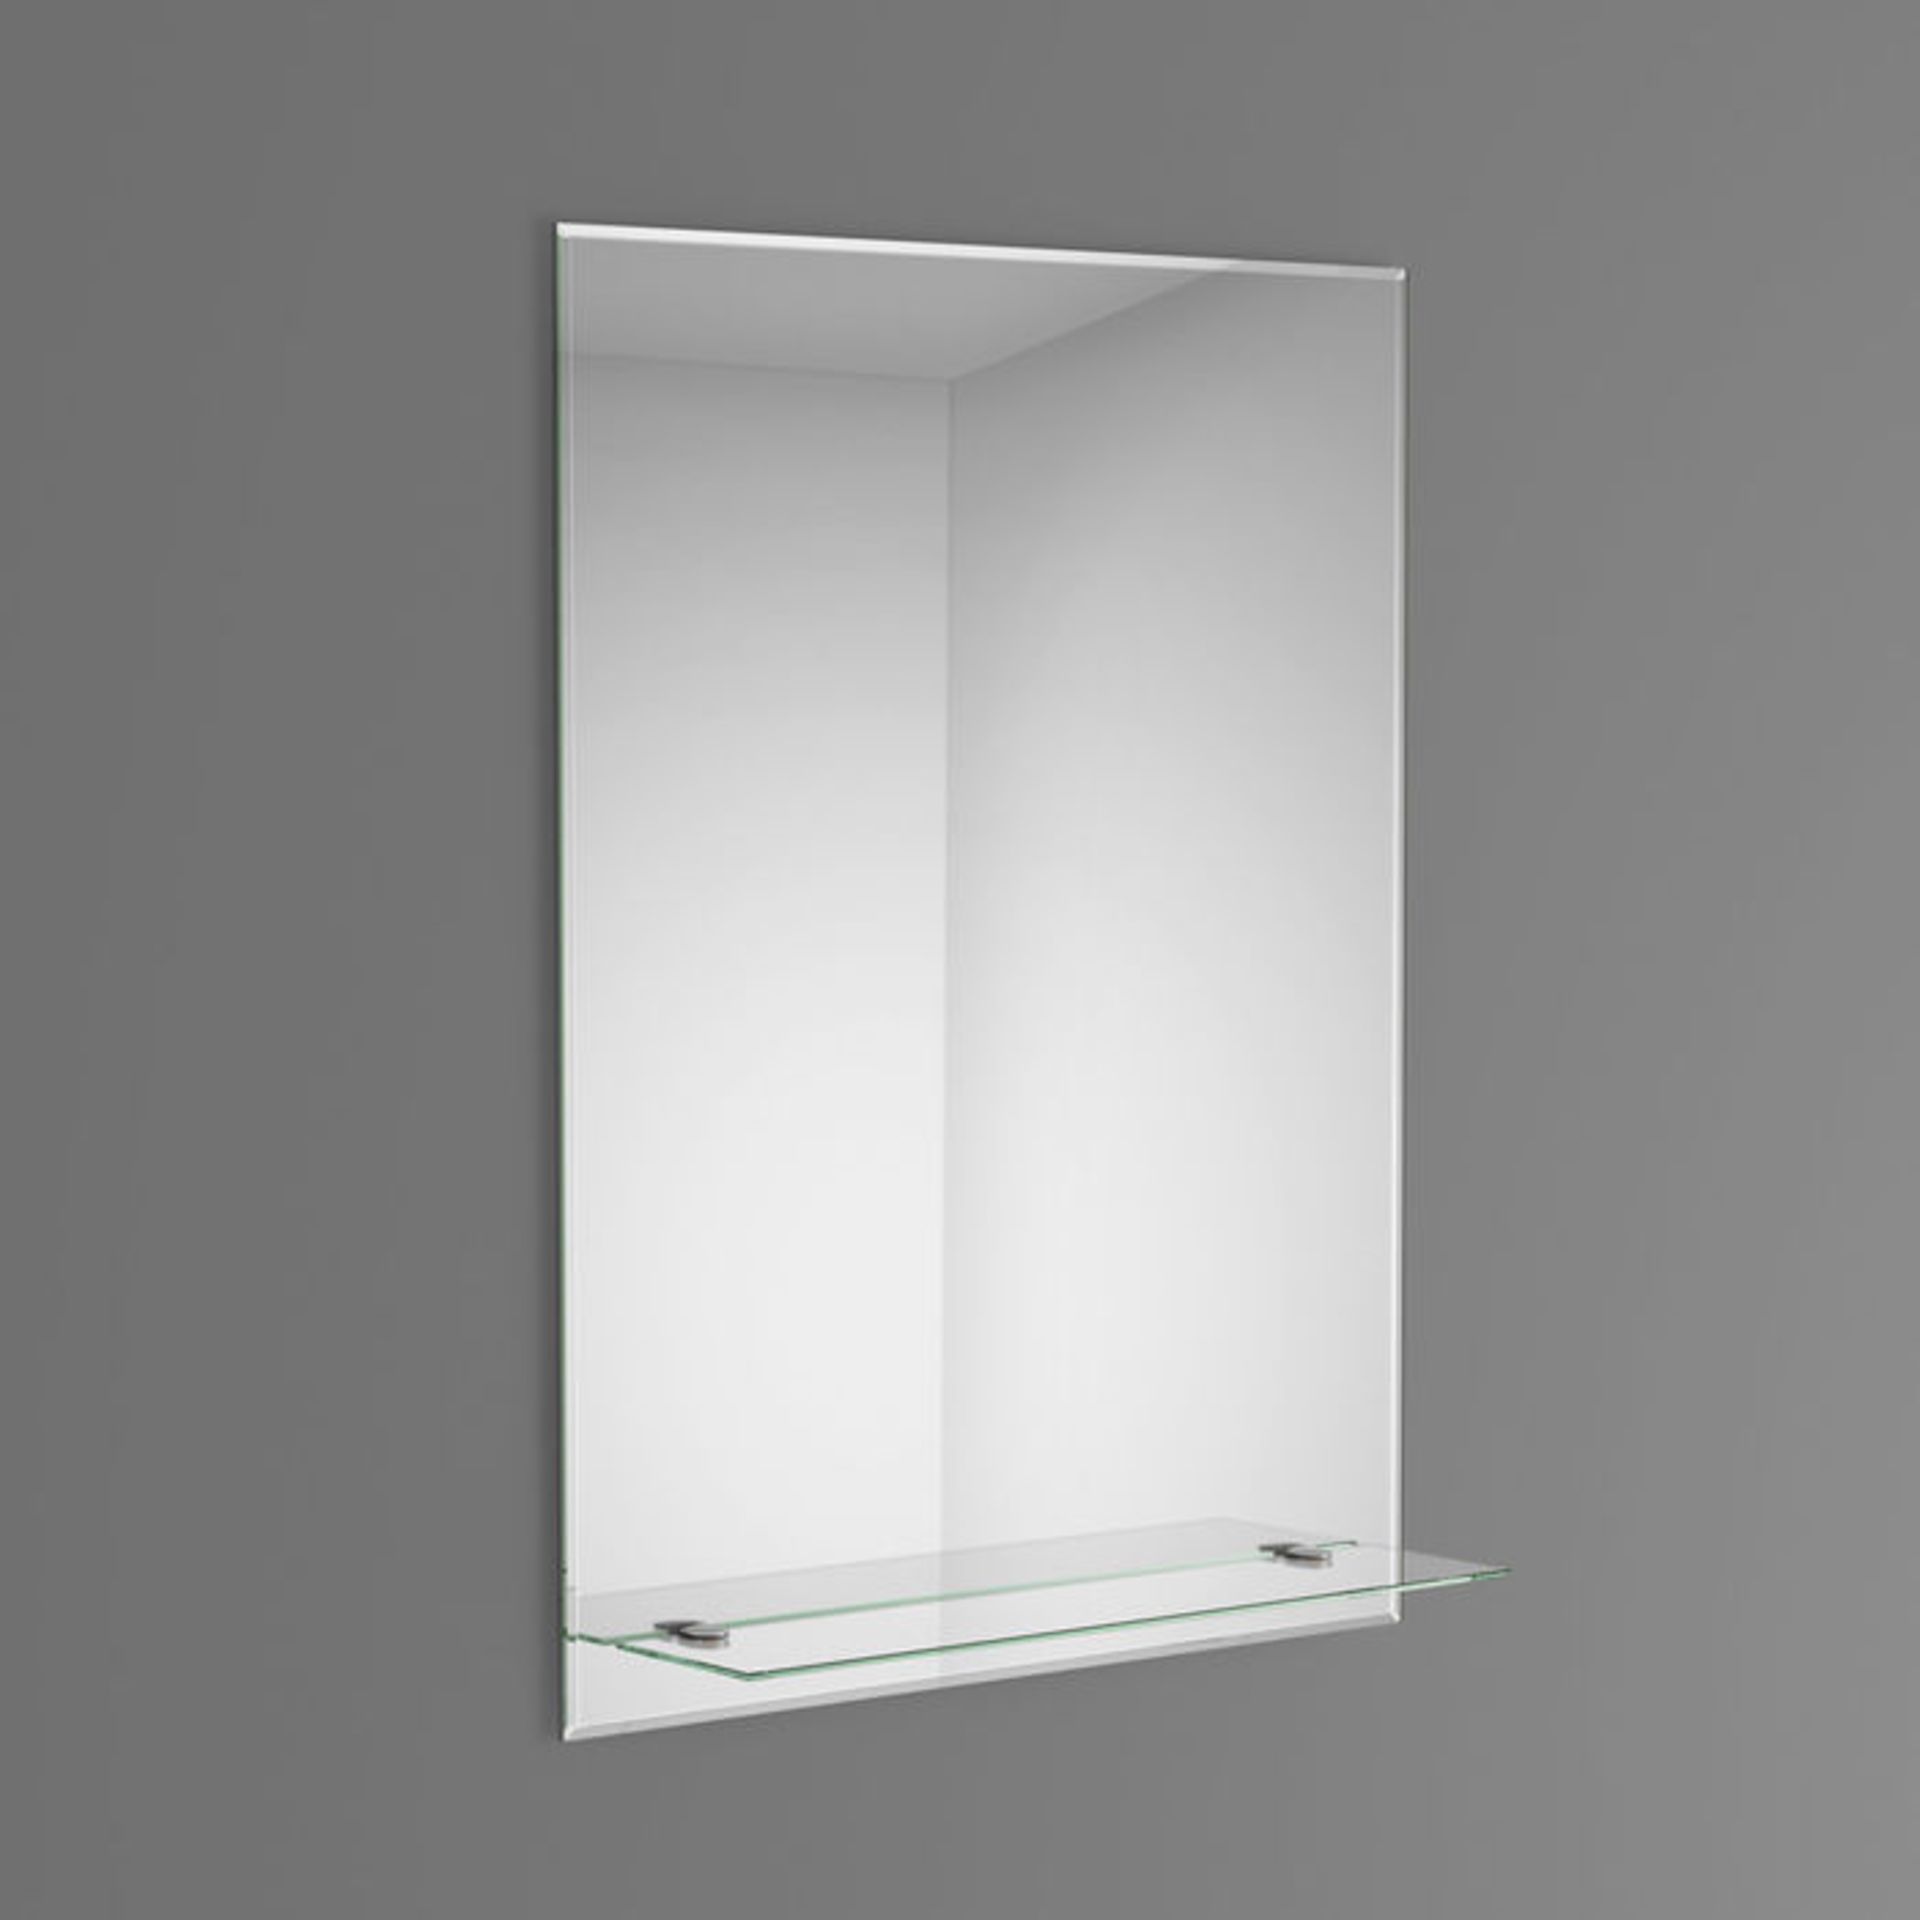 (TP193) 800x600mm Jesmond Mirror & Shelf. We love this because you can use it to store all of your - Image 3 of 3